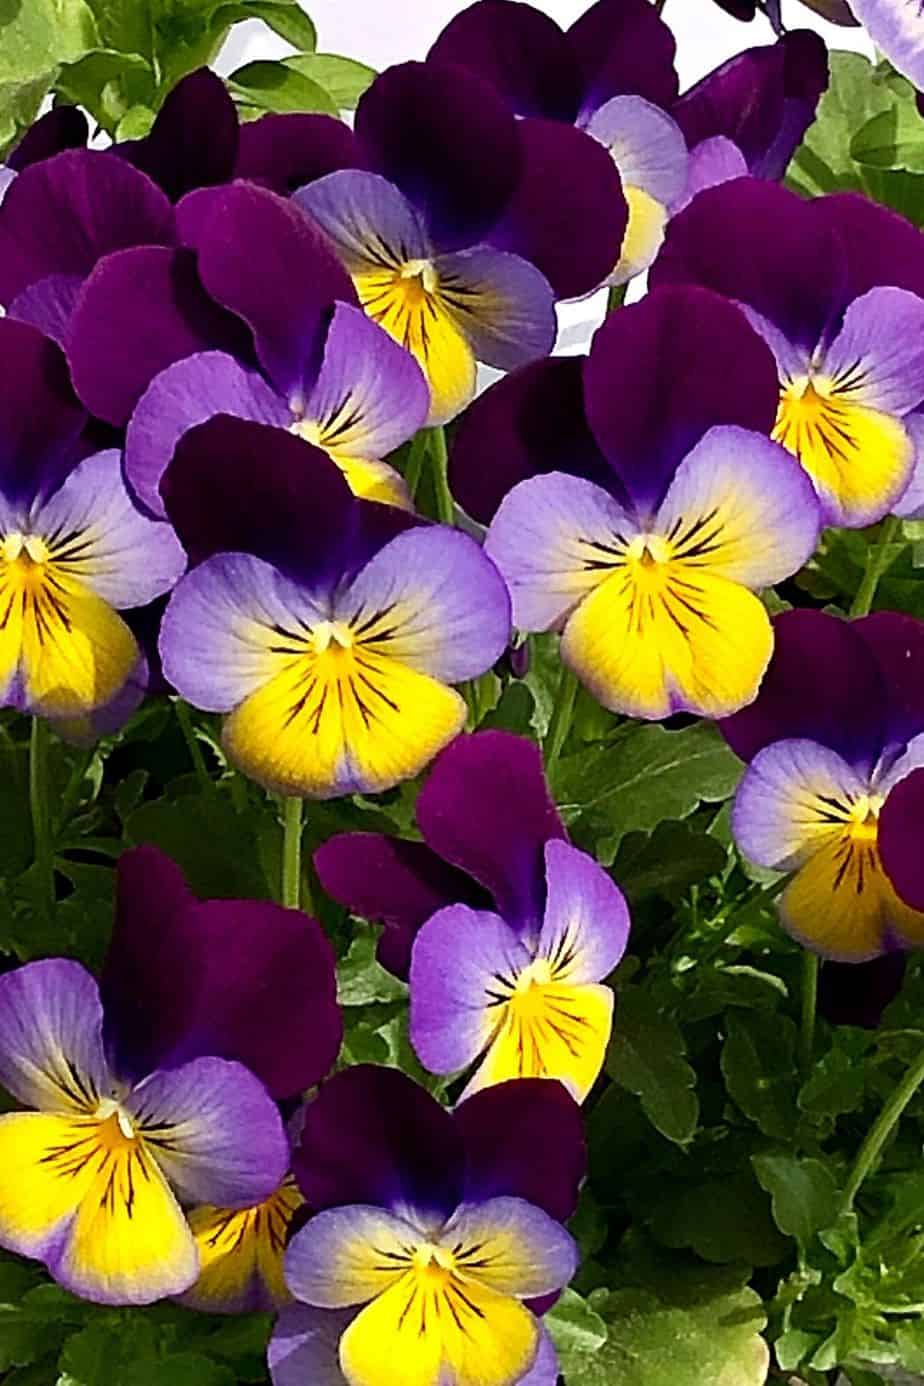 Whether you grow Pansy in a pot, as a border plant, or in the garden, it will thrive in the east-facing side of the house